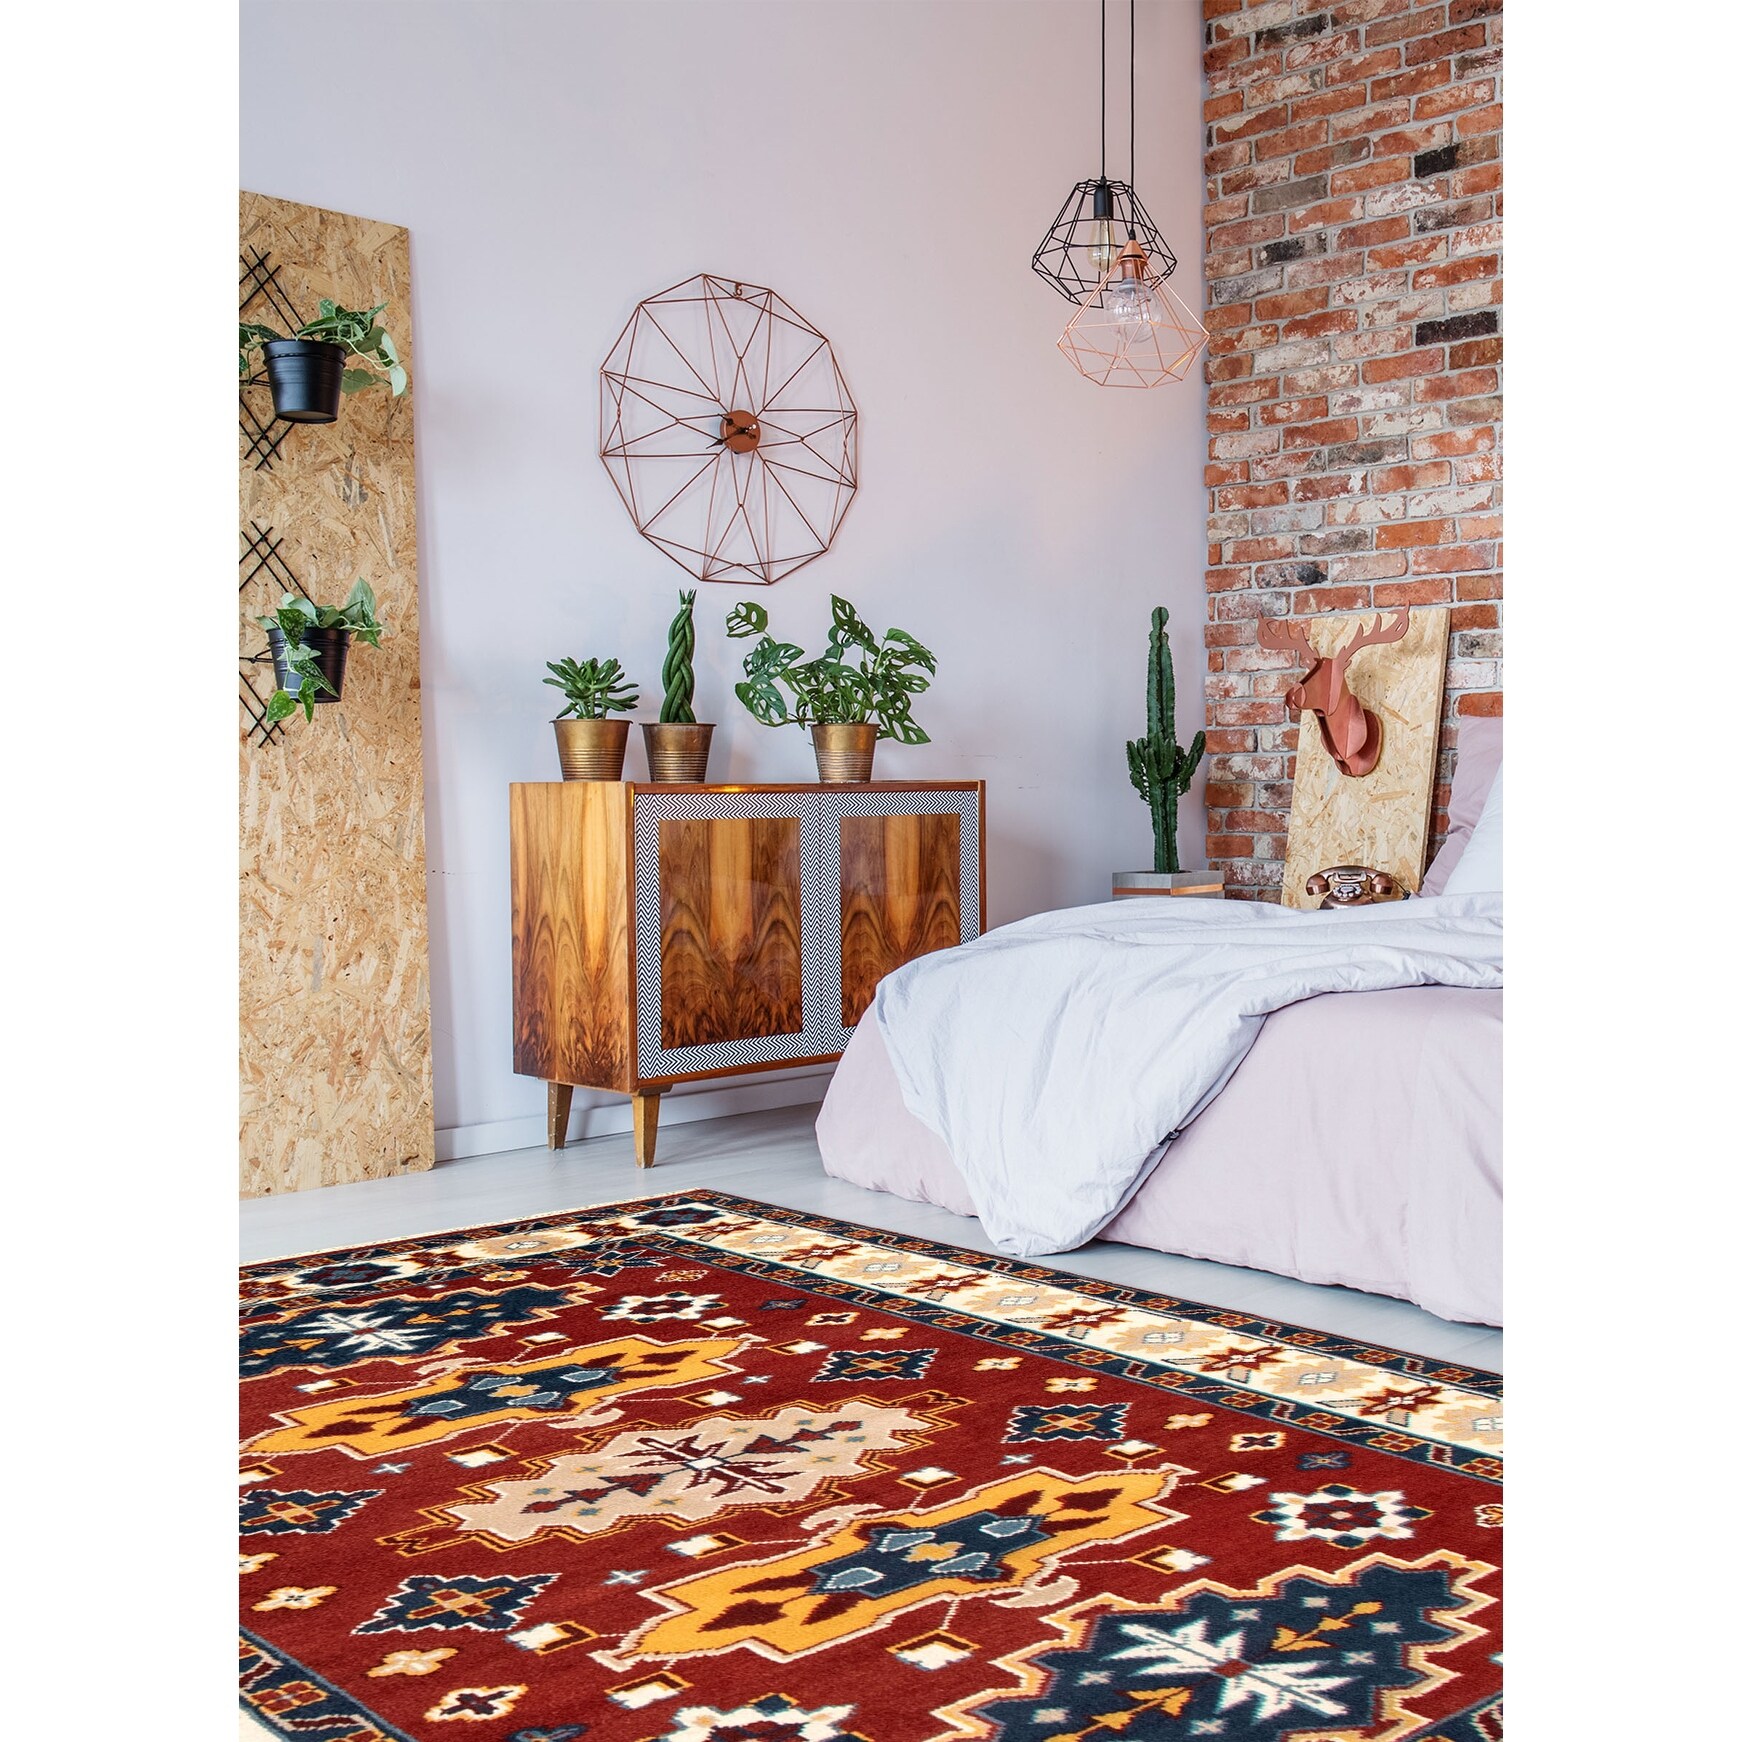 Bohemian Red Carpet Hand Knotted Living Room Area Rugs Bedroom